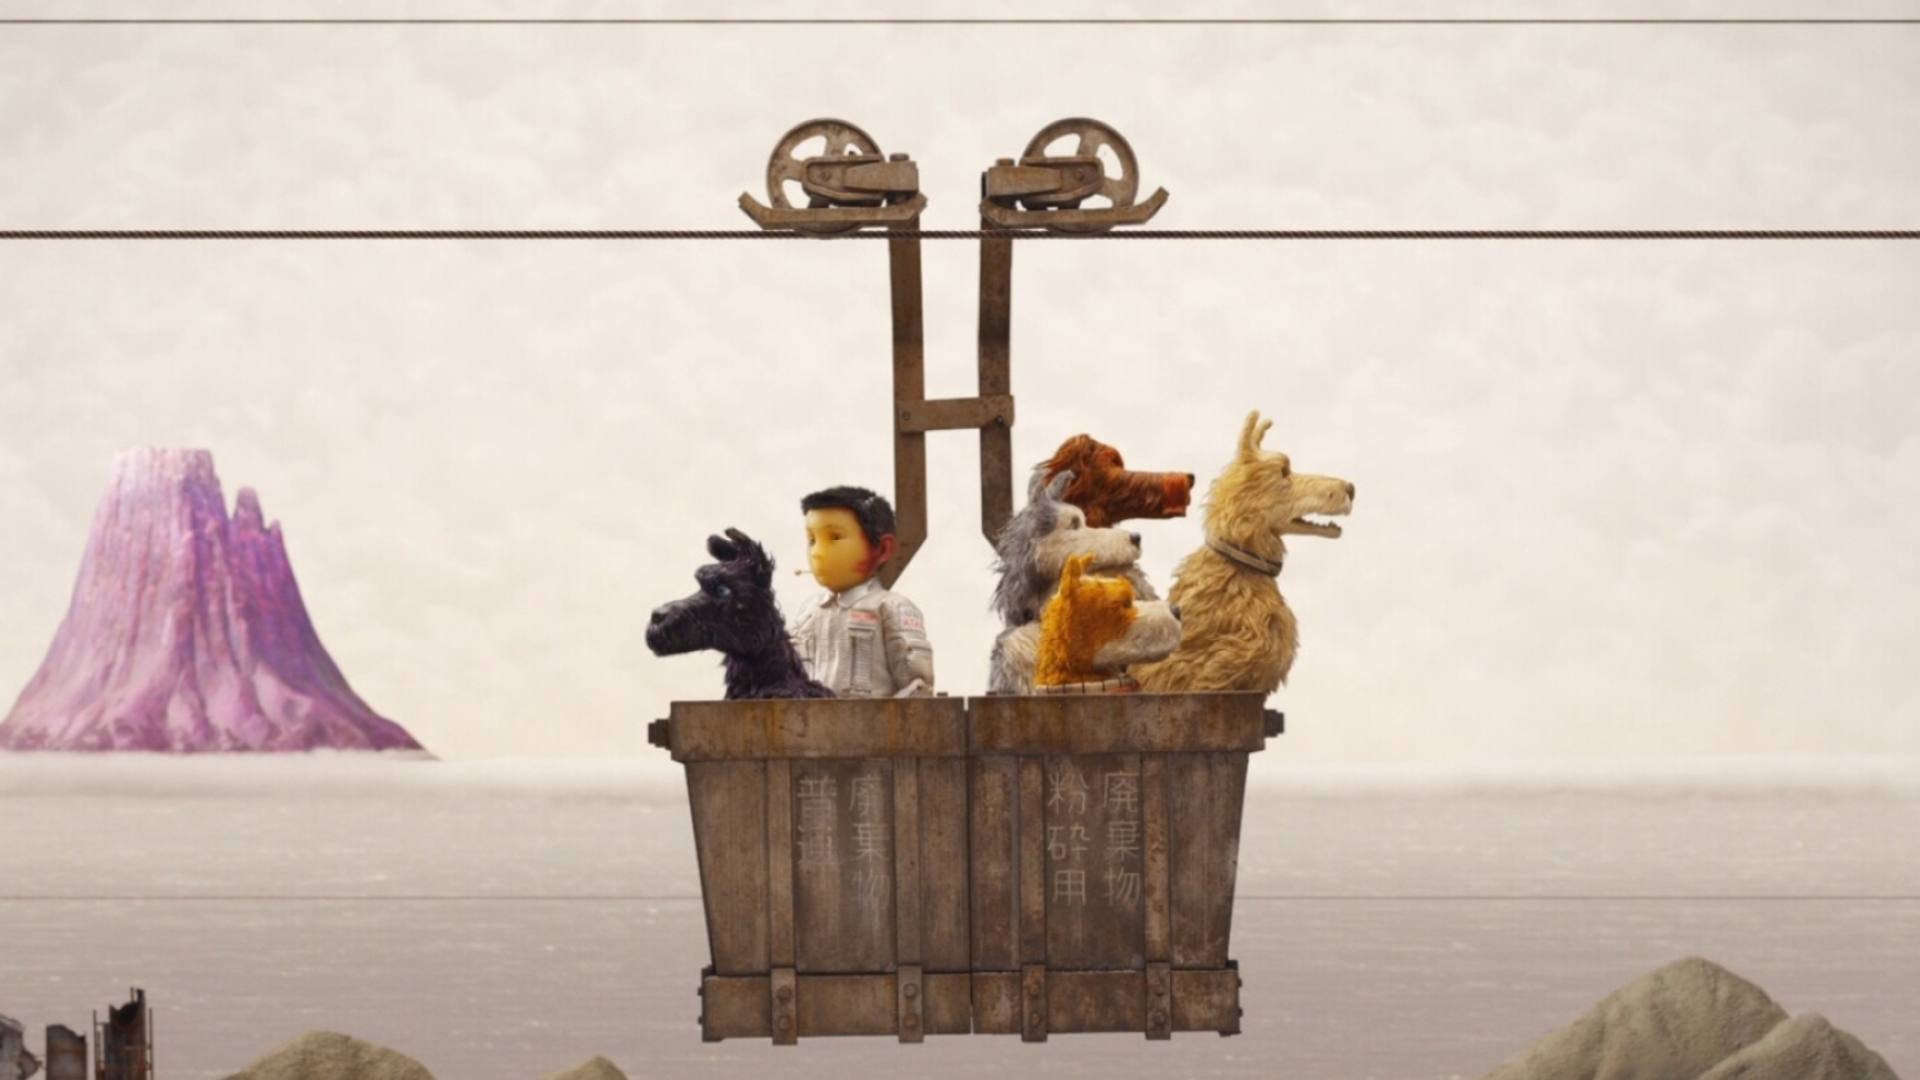 Isle of Dogs: Set in a near-future Japan, where the mayor of Megasaki has ordered that all the city's canines be exiled to an island. 1920x1080 Full HD Wallpaper.